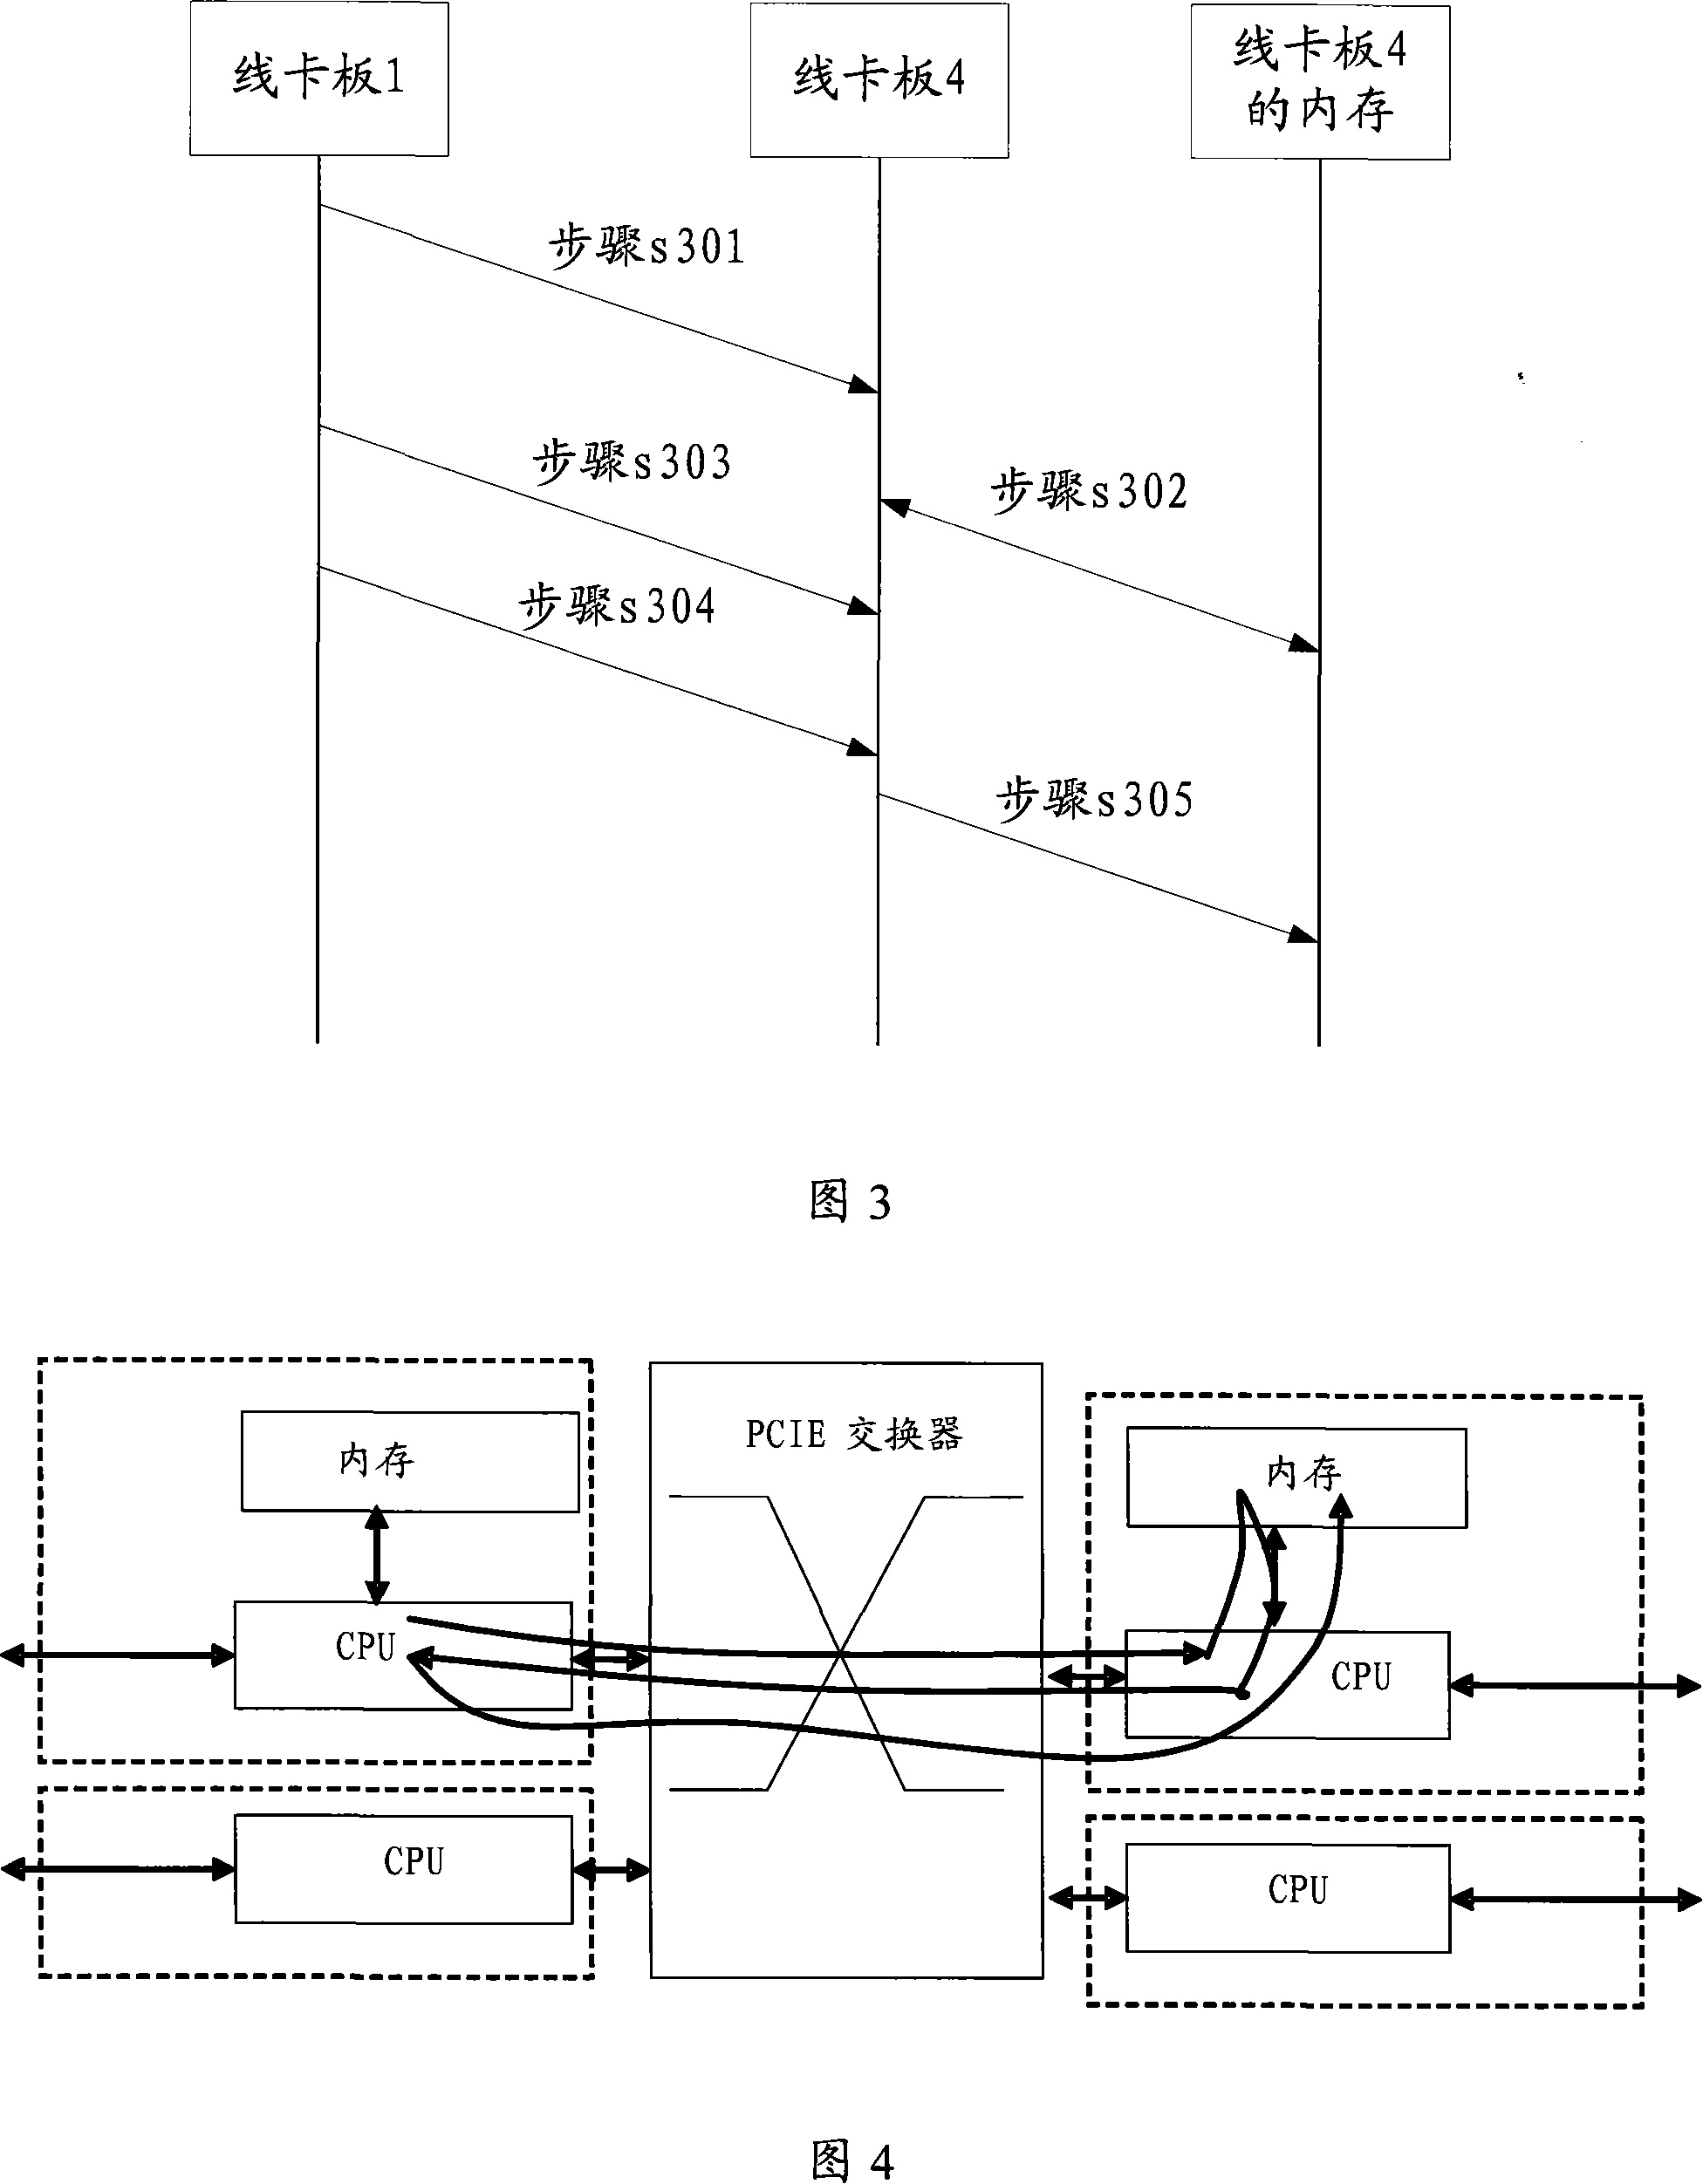 A PCIE data transmission method, system and device